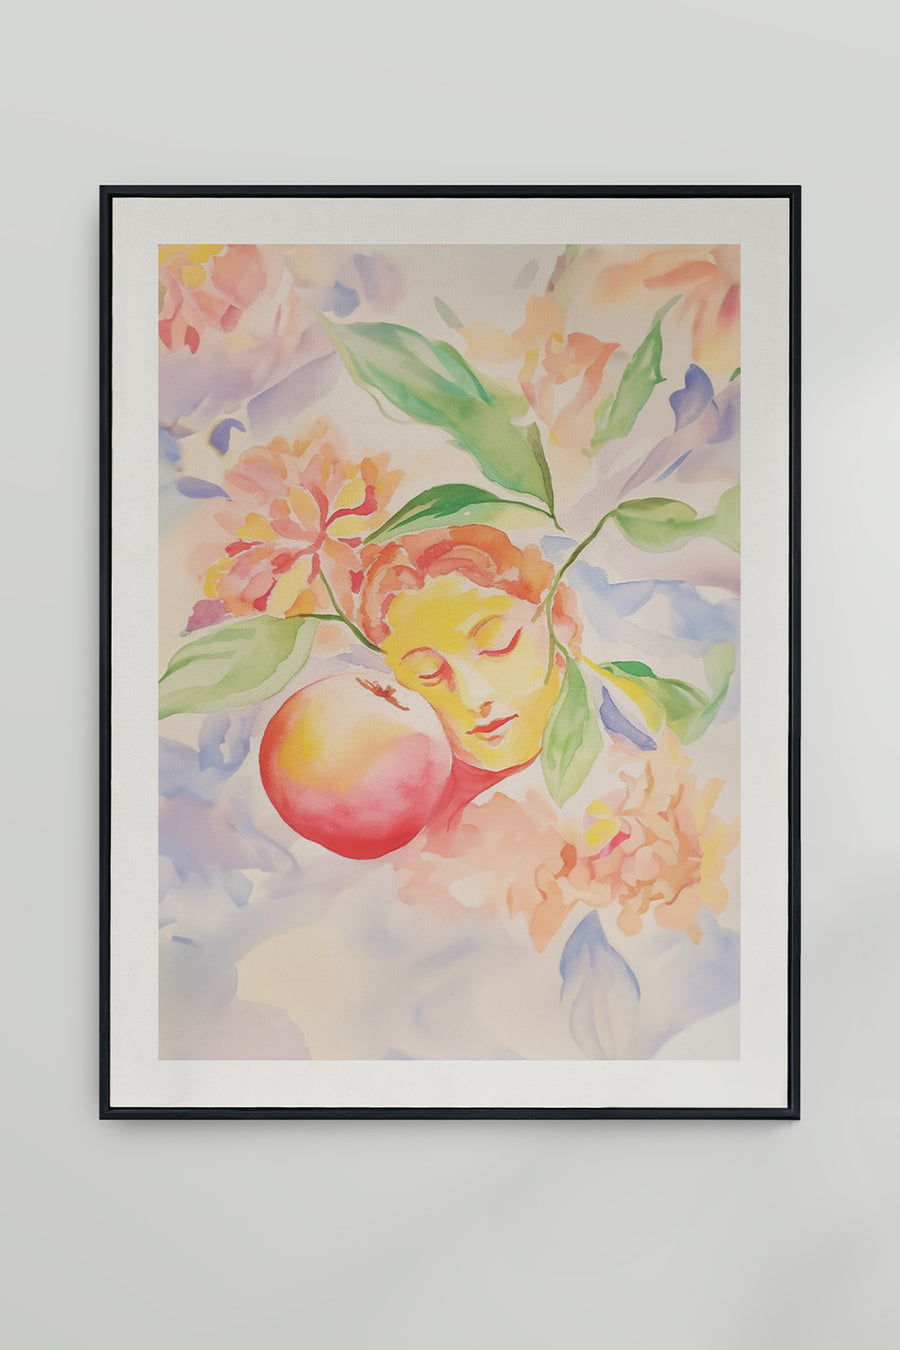 Dreamy watercolor portraits inspired by peaches - Peach Petals Art Prints.